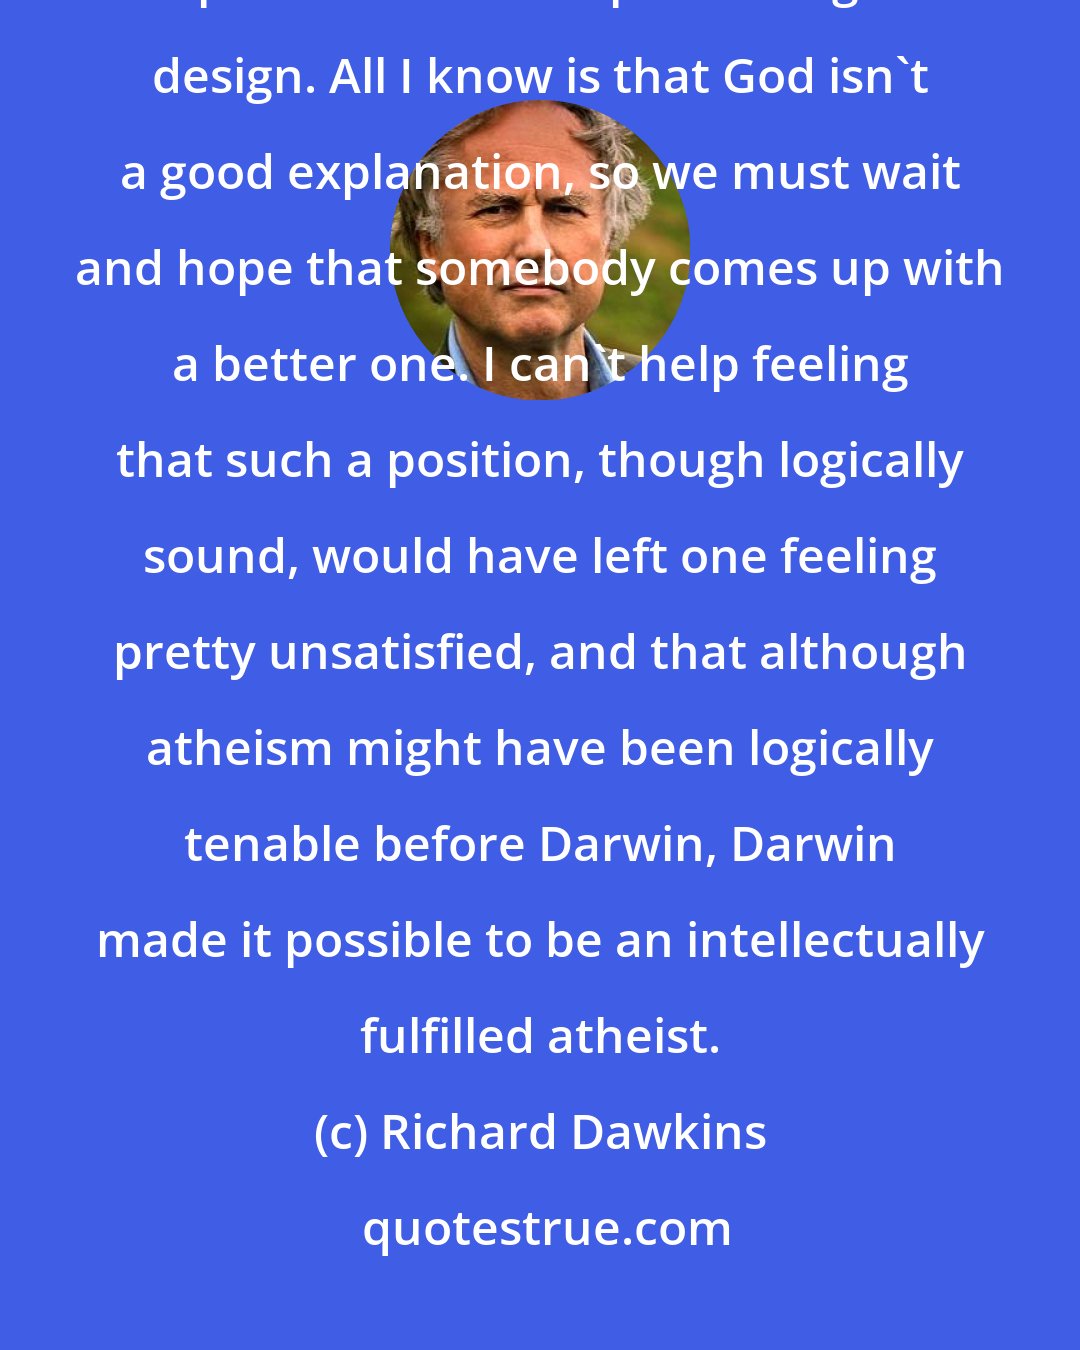 Richard Dawkins: An atheist before Darwin could have said, following Hume: I have no explanation for complex biological design. All I know is that God isn't a good explanation, so we must wait and hope that somebody comes up with a better one. I can't help feeling that such a position, though logically sound, would have left one feeling pretty unsatisfied, and that although atheism might have been logically tenable before Darwin, Darwin made it possible to be an intellectually fulfilled atheist.